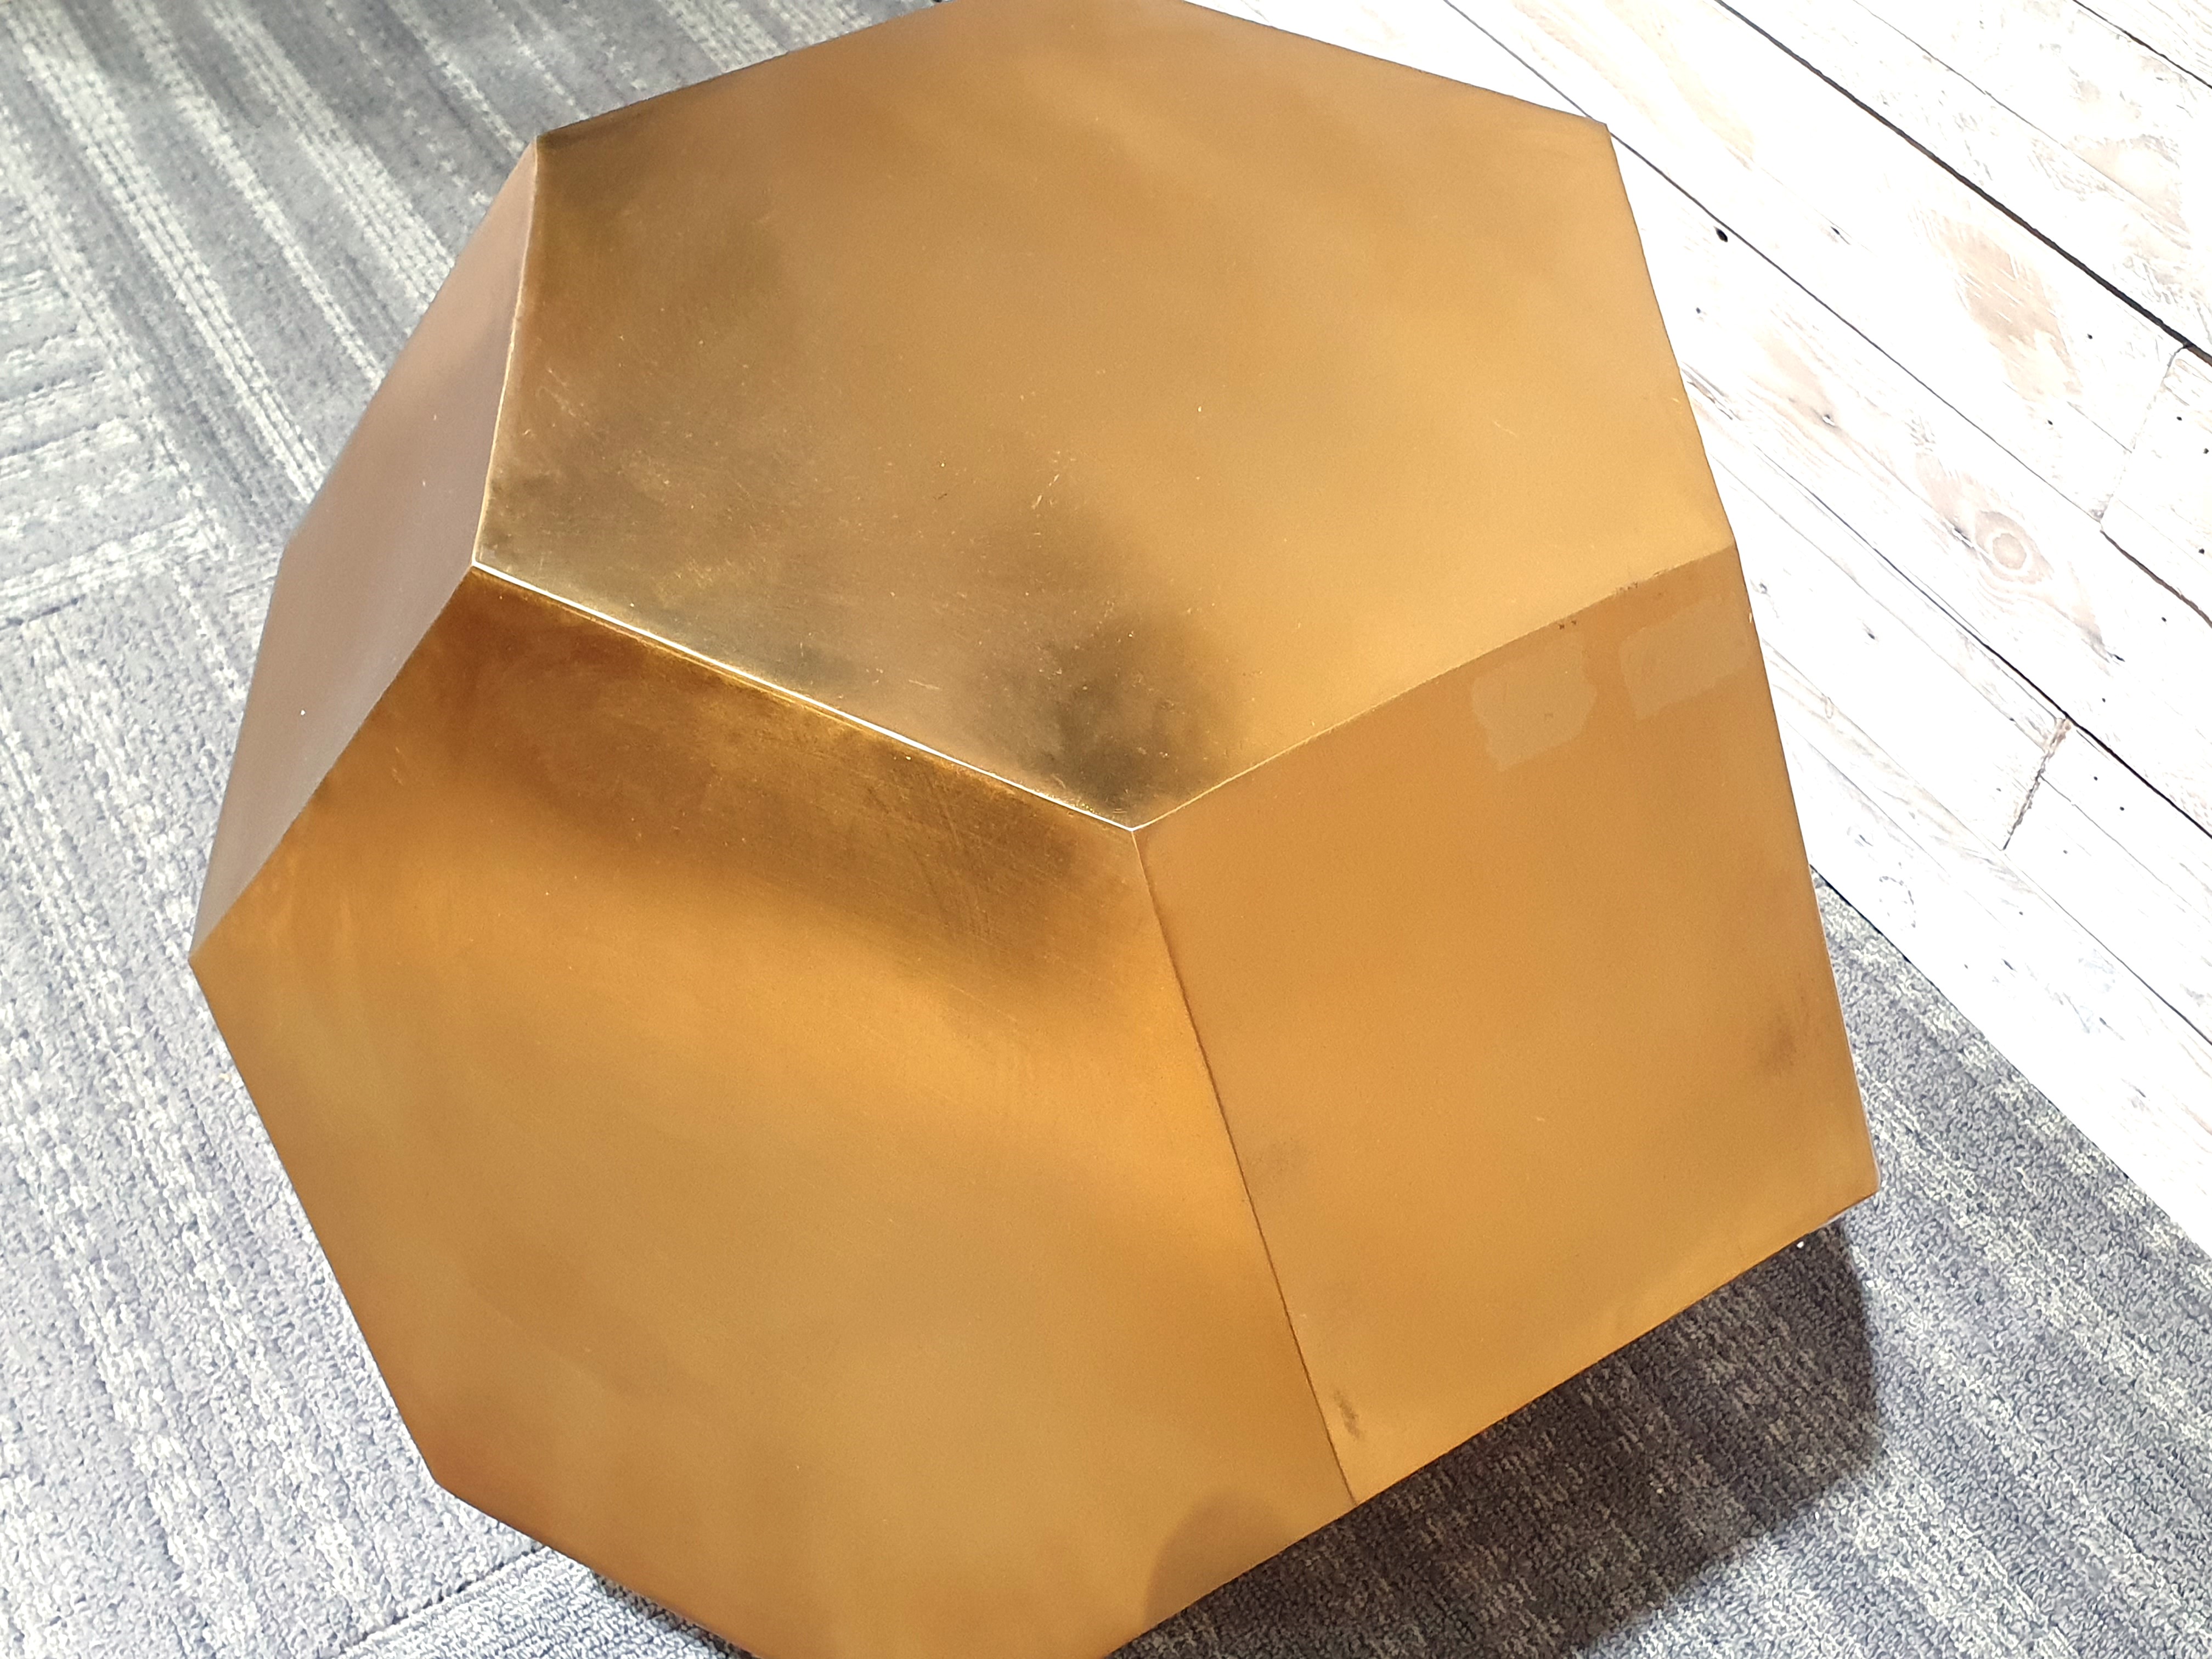 Designer Loaf.com Gold Coloured Metal Dodecagon Side Table 50cm Tall x 55cm Across. Rrp £199 - Image 2 of 3